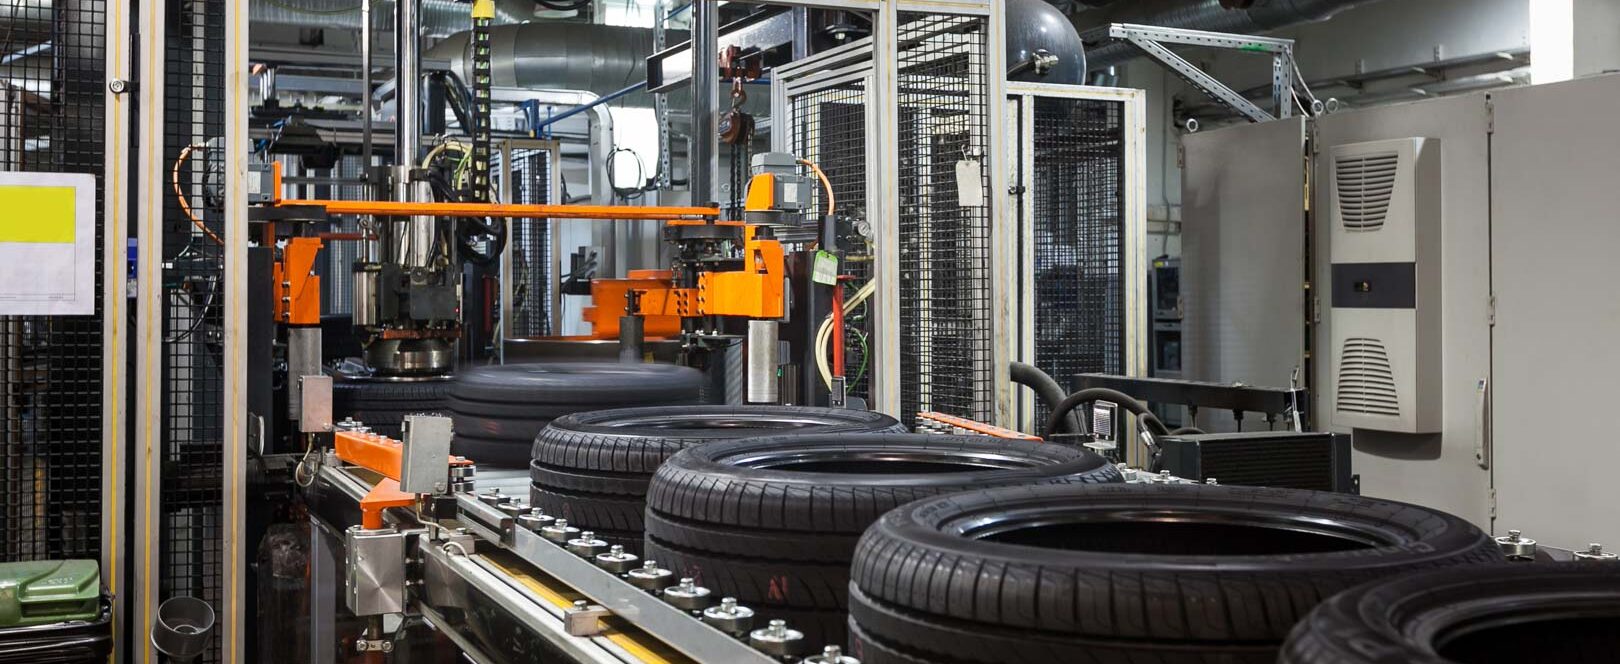 Tires on the production line